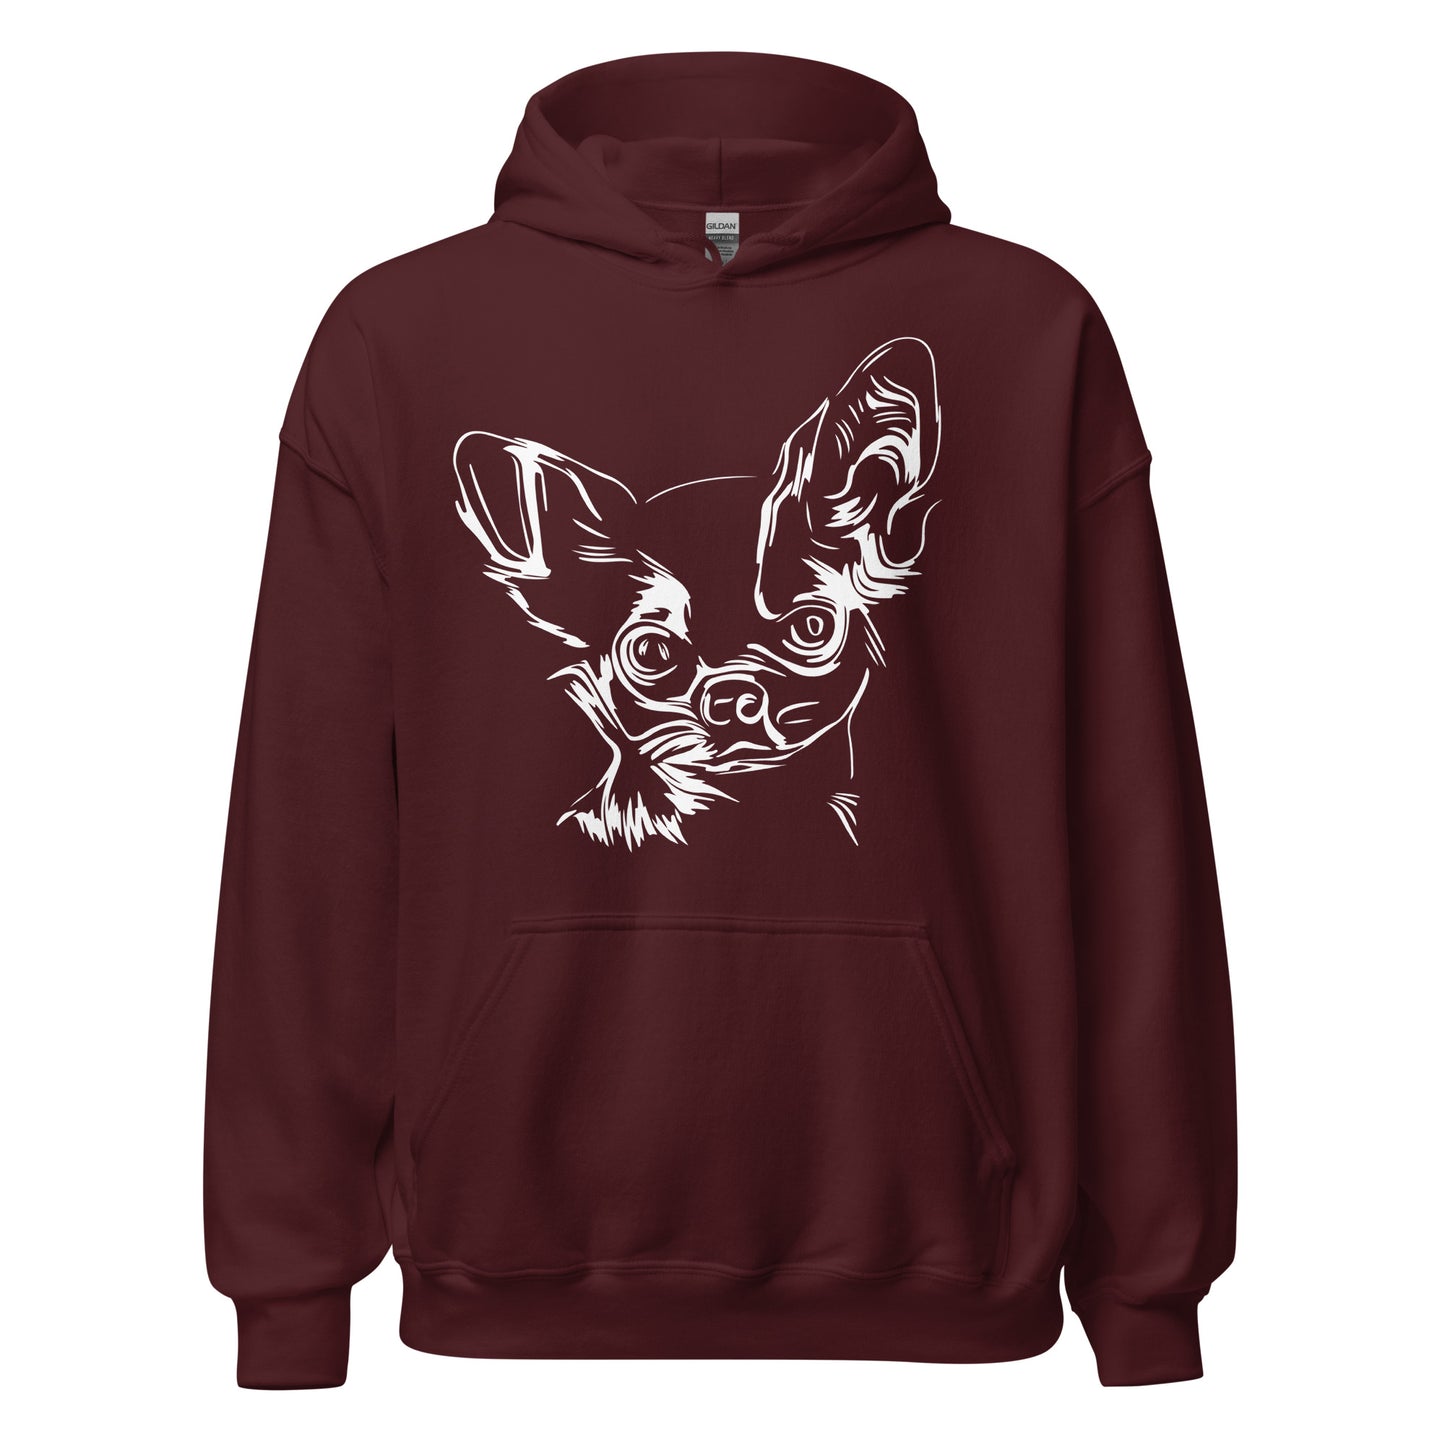 White line Chihuahua face on unisex maroon hoodie